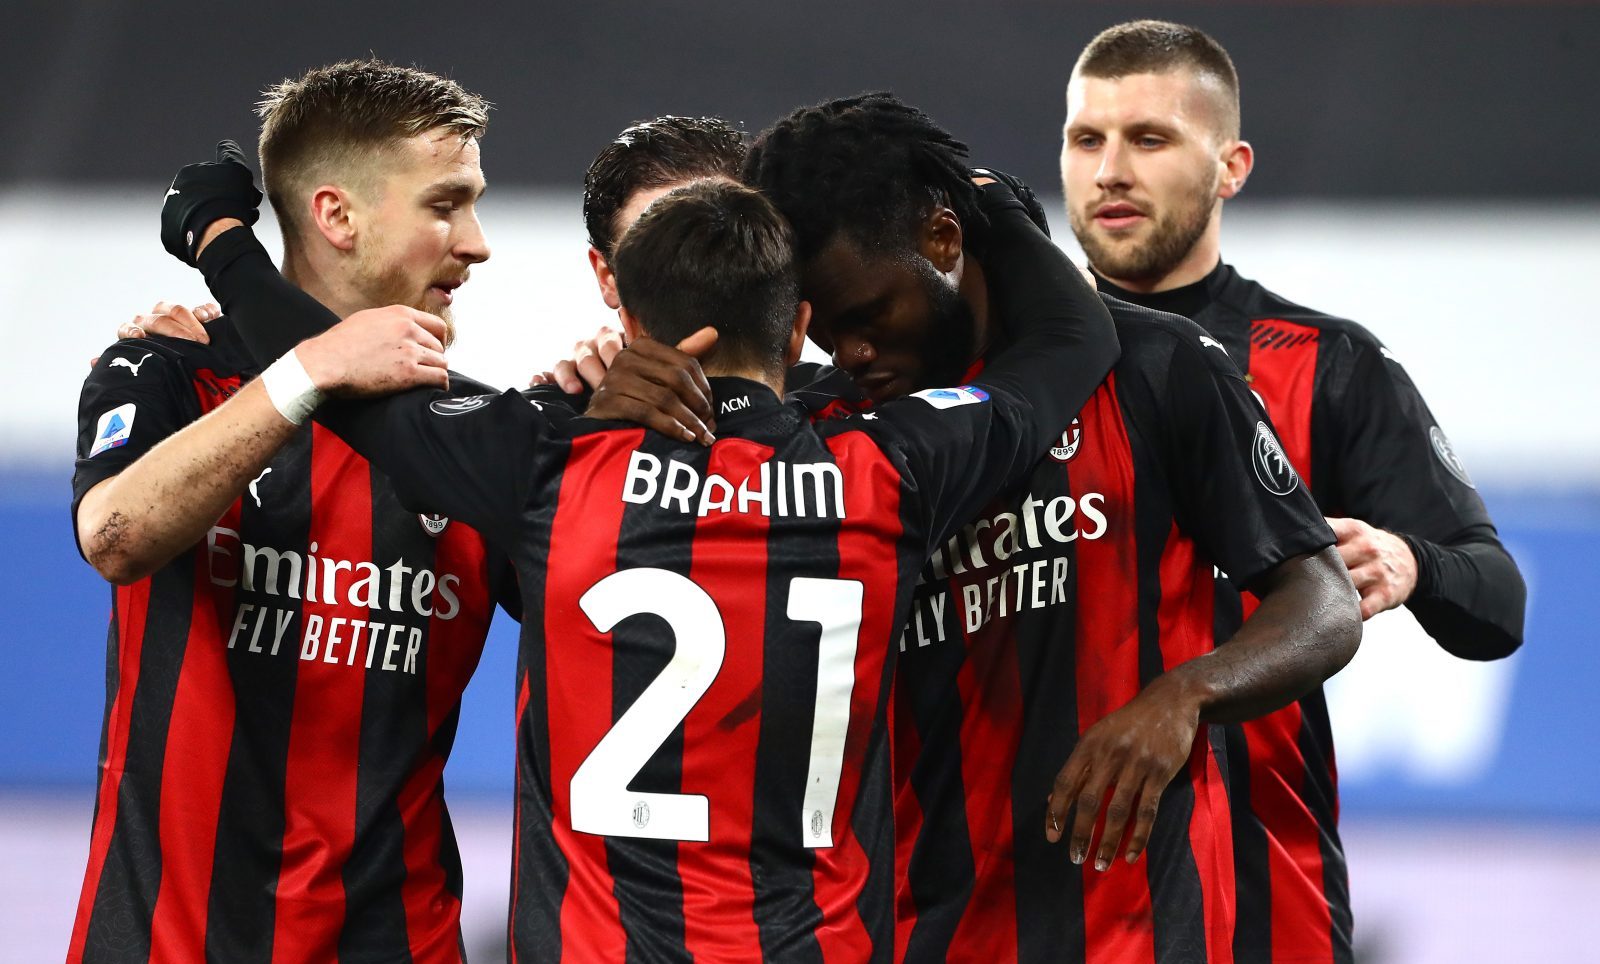 Milan don’t want to stop dreaming, as the Rossoneri took three important points out of their trip to the Marassi in Genoa as they toppled Sampdoria 2-1